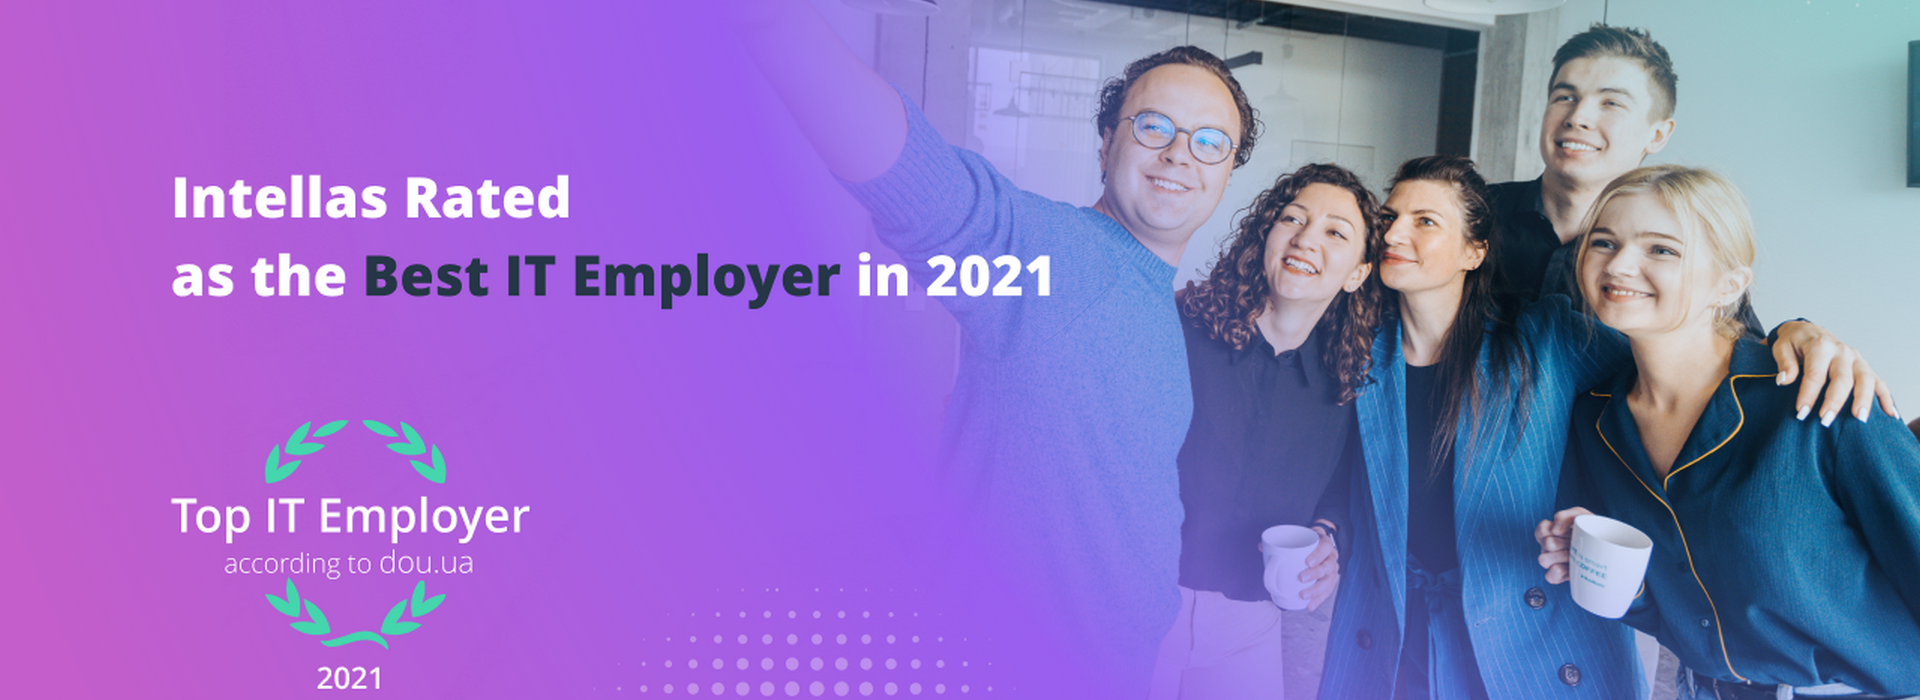 Intellias Rated as the Best IT Employer in 2021